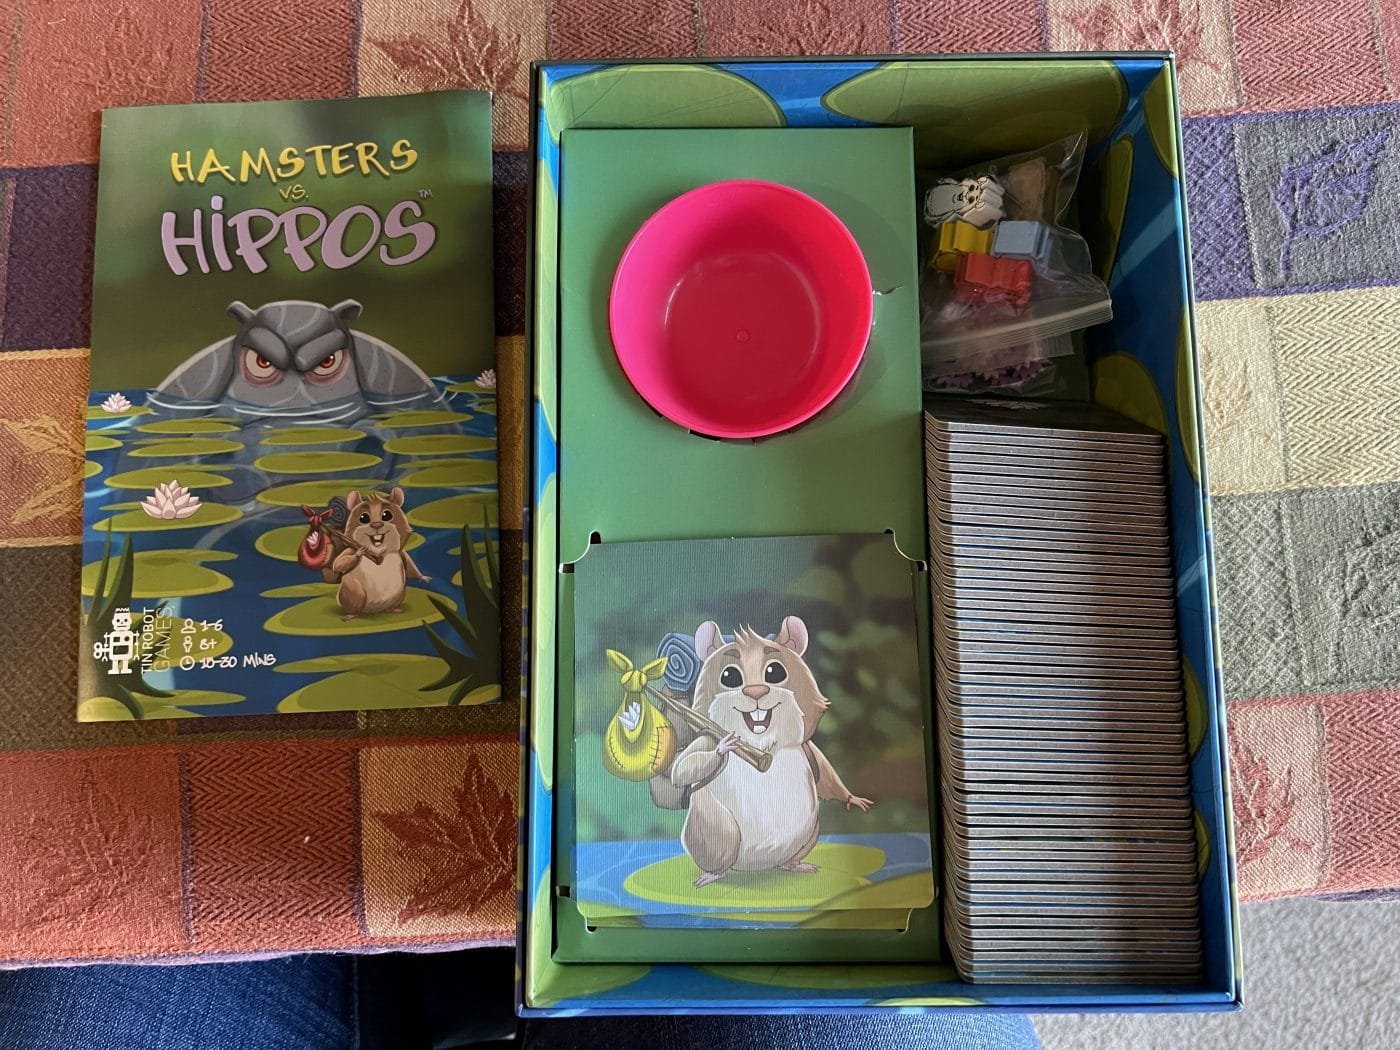 Even the box is beautifully laid out - hamsters vs. Hippos: the board game review